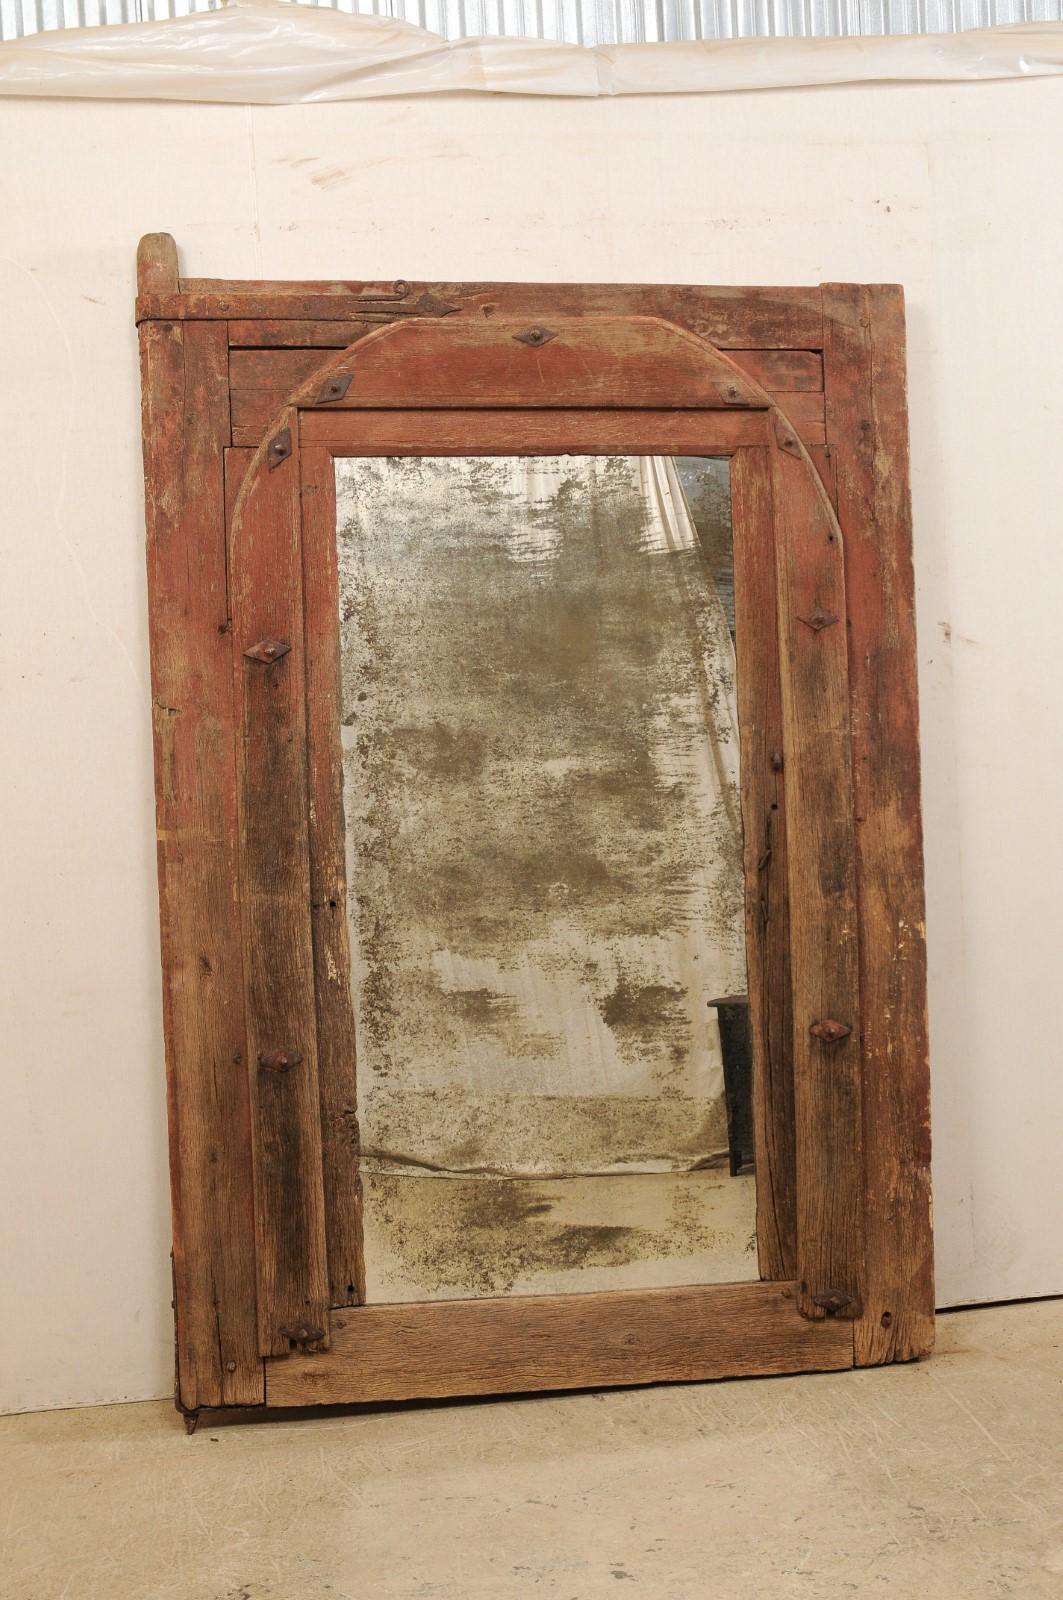 A one of a kind custom mirror using an 18th century Spanish door frame as surround. This antique wooden door frame from Spain acts as the surround for this custom designed mirror which stands impressively at over 7.5 feet in height. The door retains